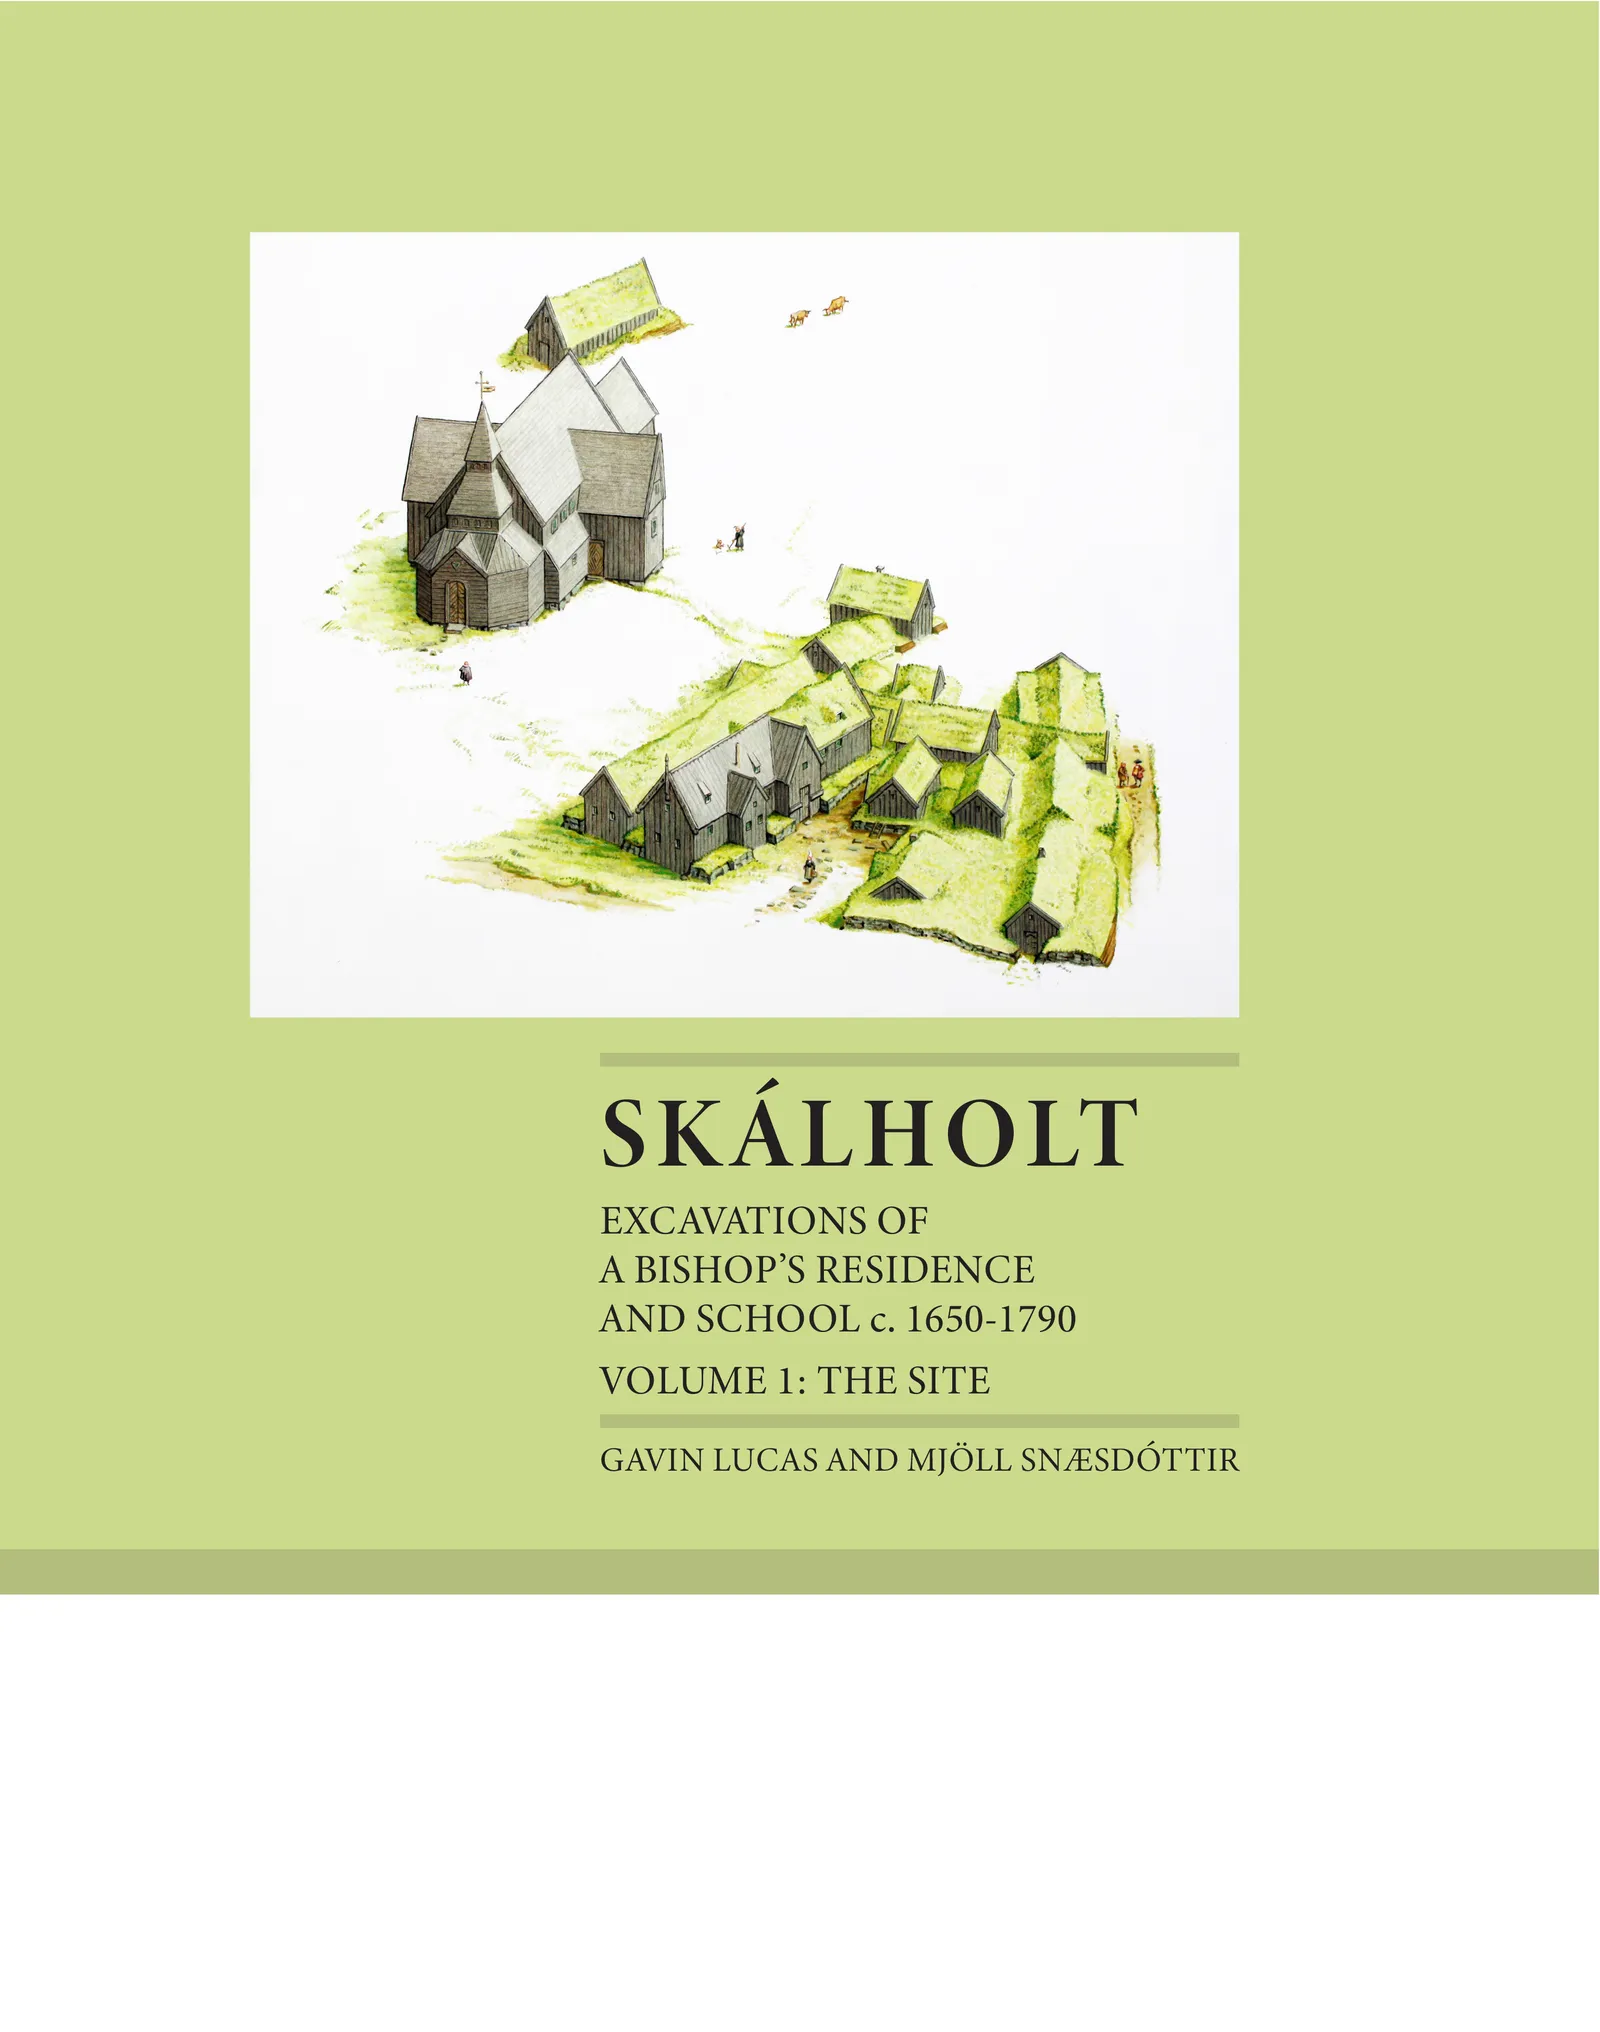 Bókakápa: Institute of Archaeology Monograph Series Skálholt: Excavations of a Bishop's Residence and School c. 1650-1790 Volume 1: The Site